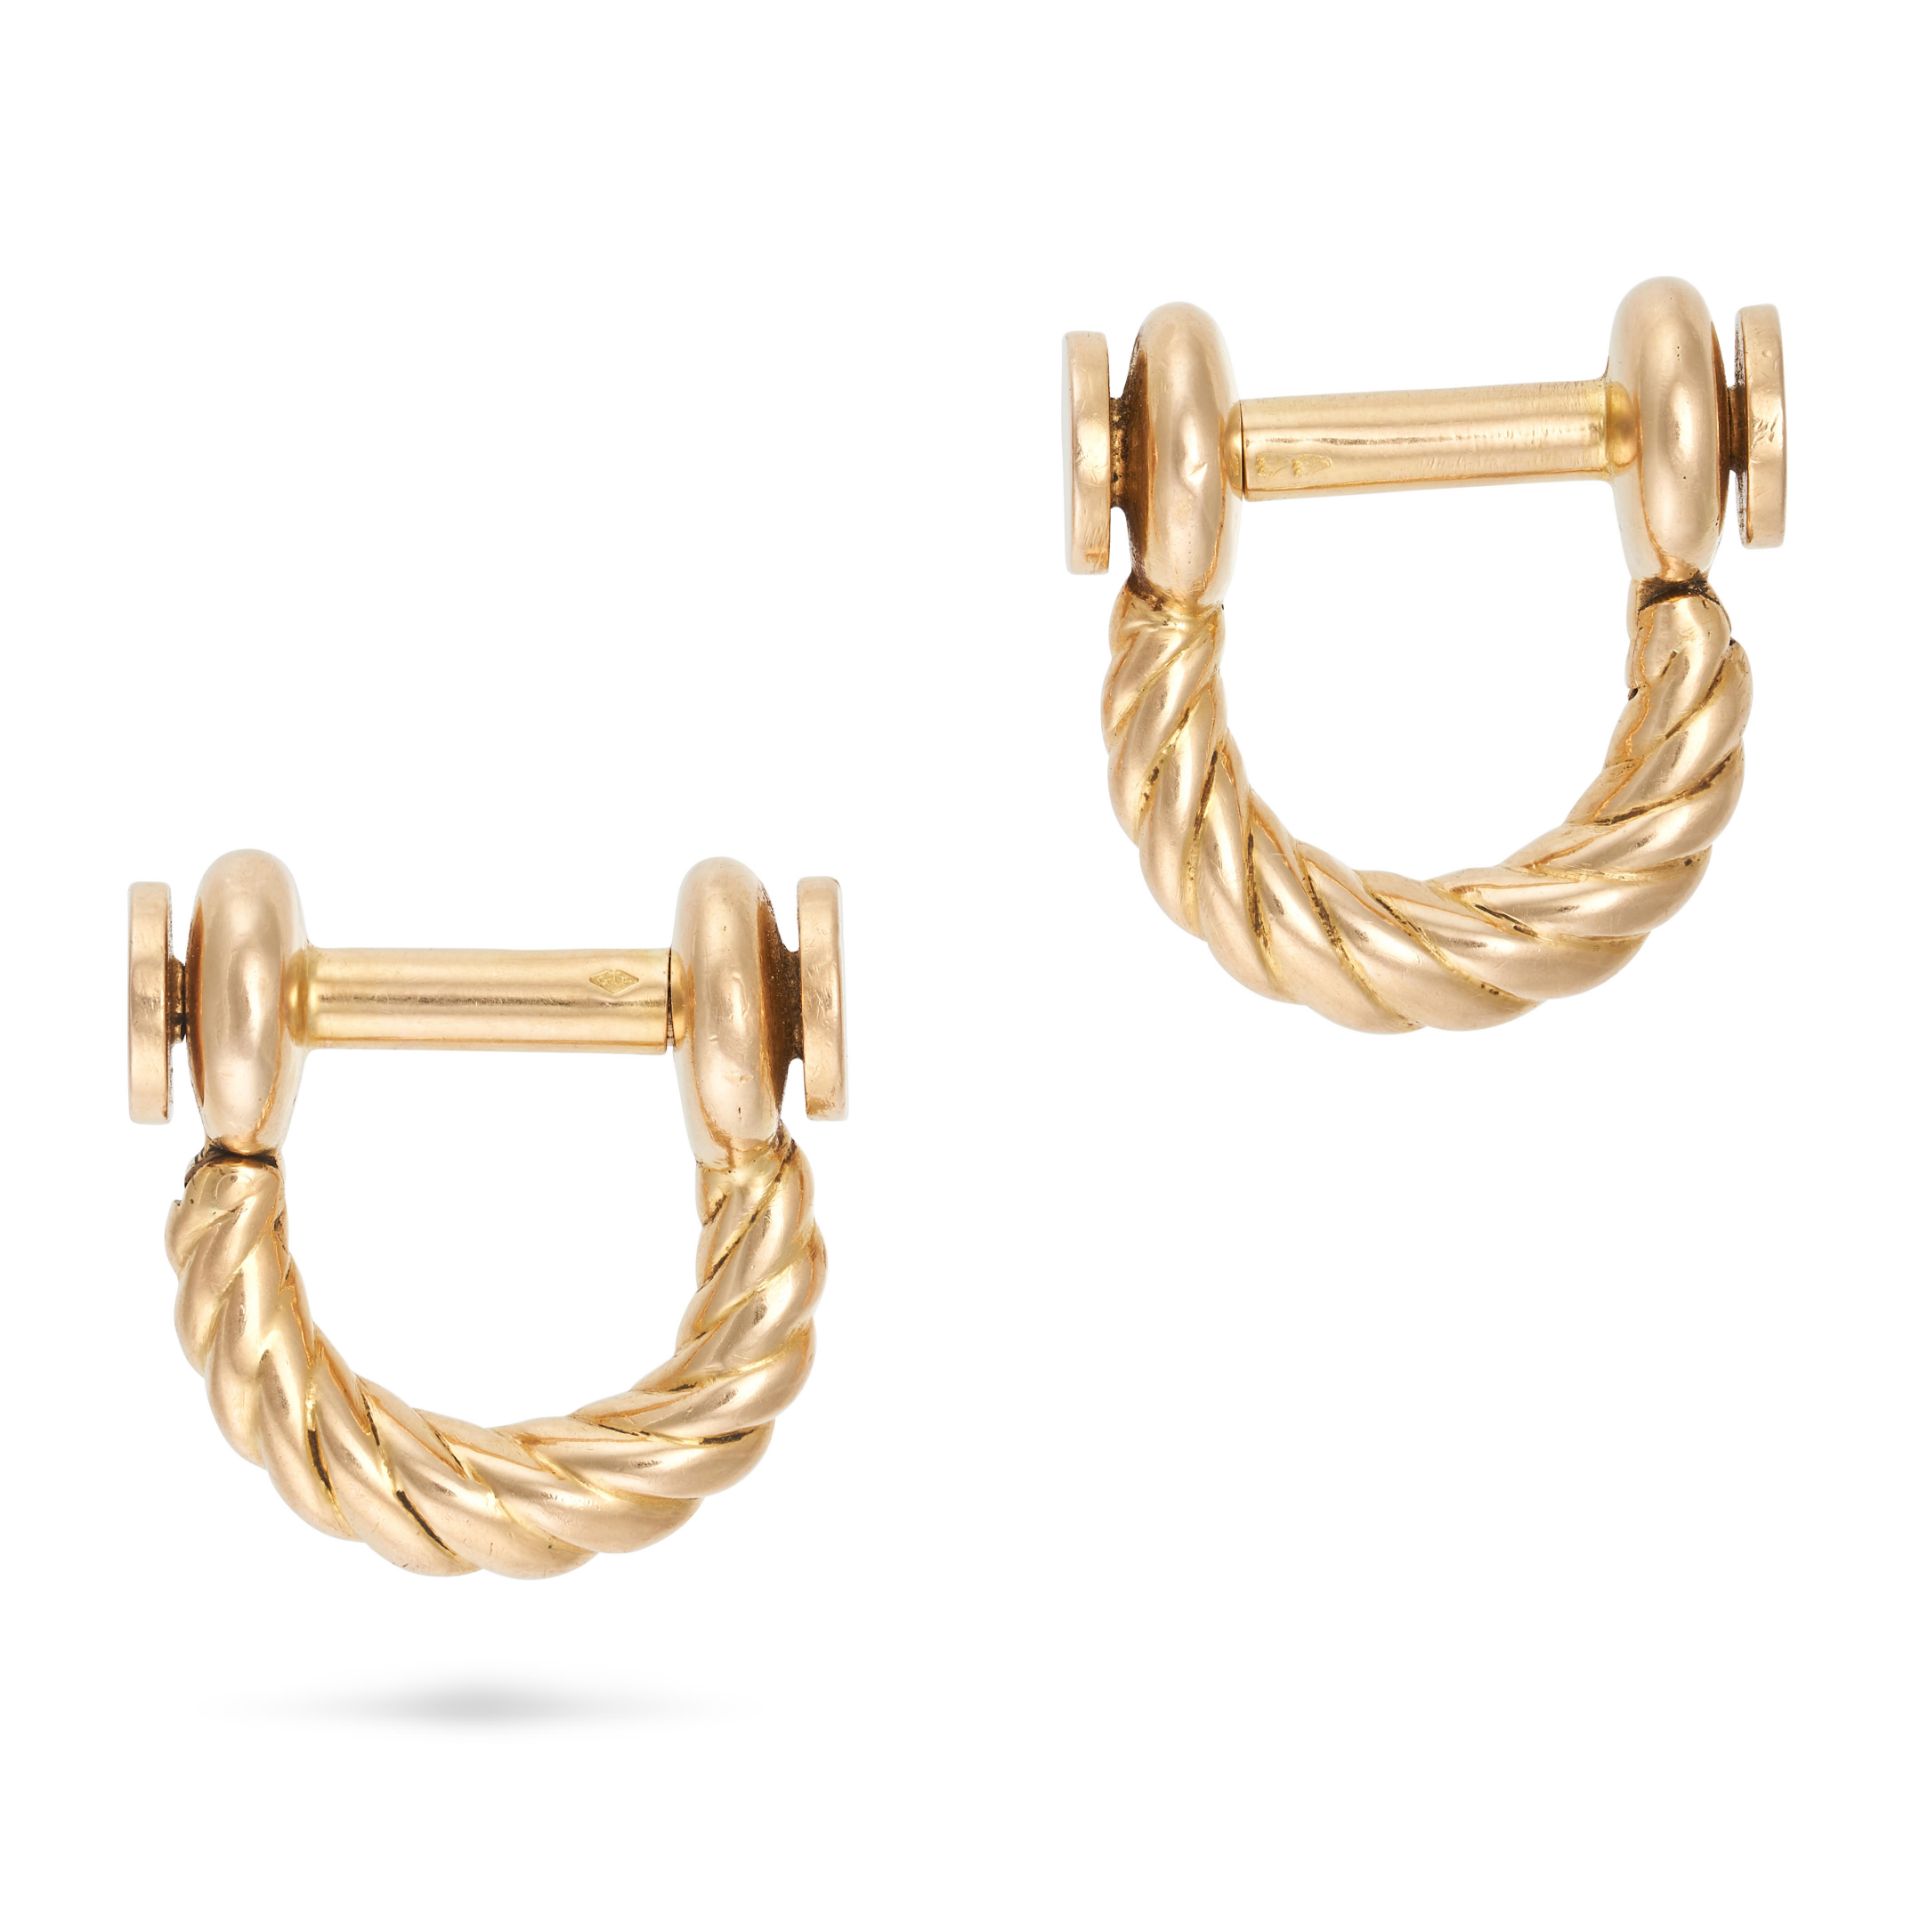 HERMES, A PAIR OF STIRRUP CUFFLINKS in 18ct yellow gold, designed as fluted stirrups, Gaetan de P...